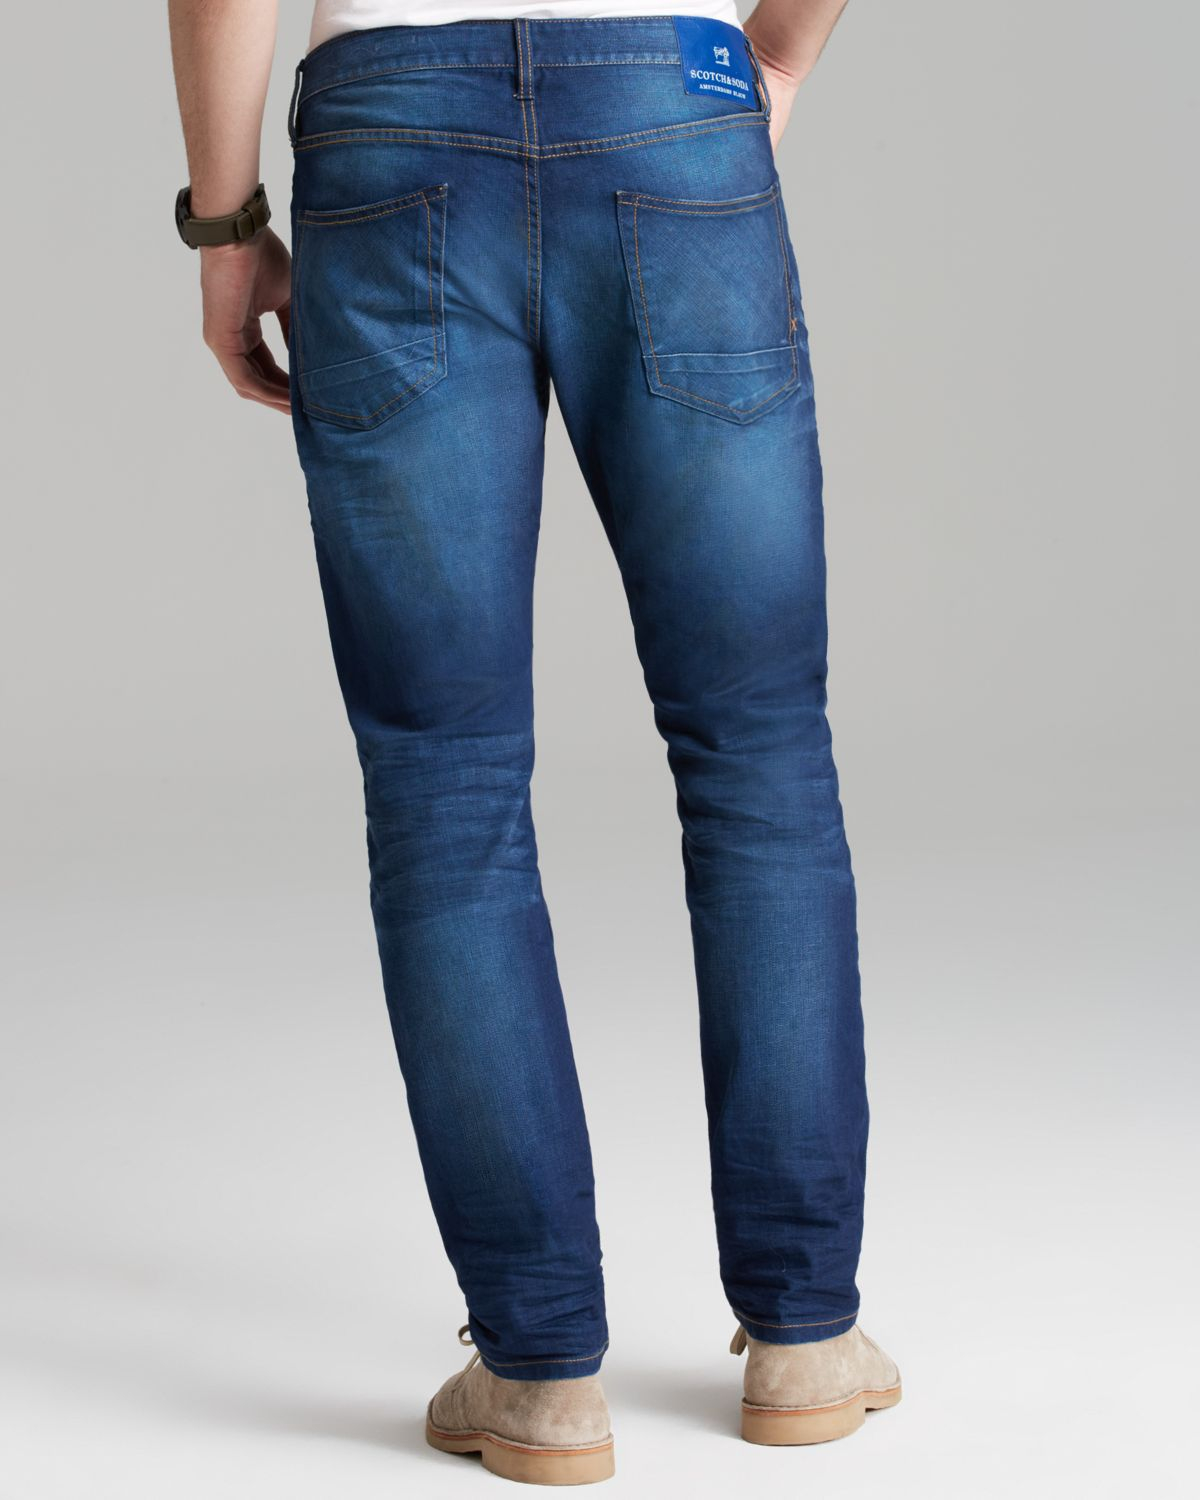 Scotch & soda Jeans Ralston Slim Straight Fit in Spirit Of Science in ...